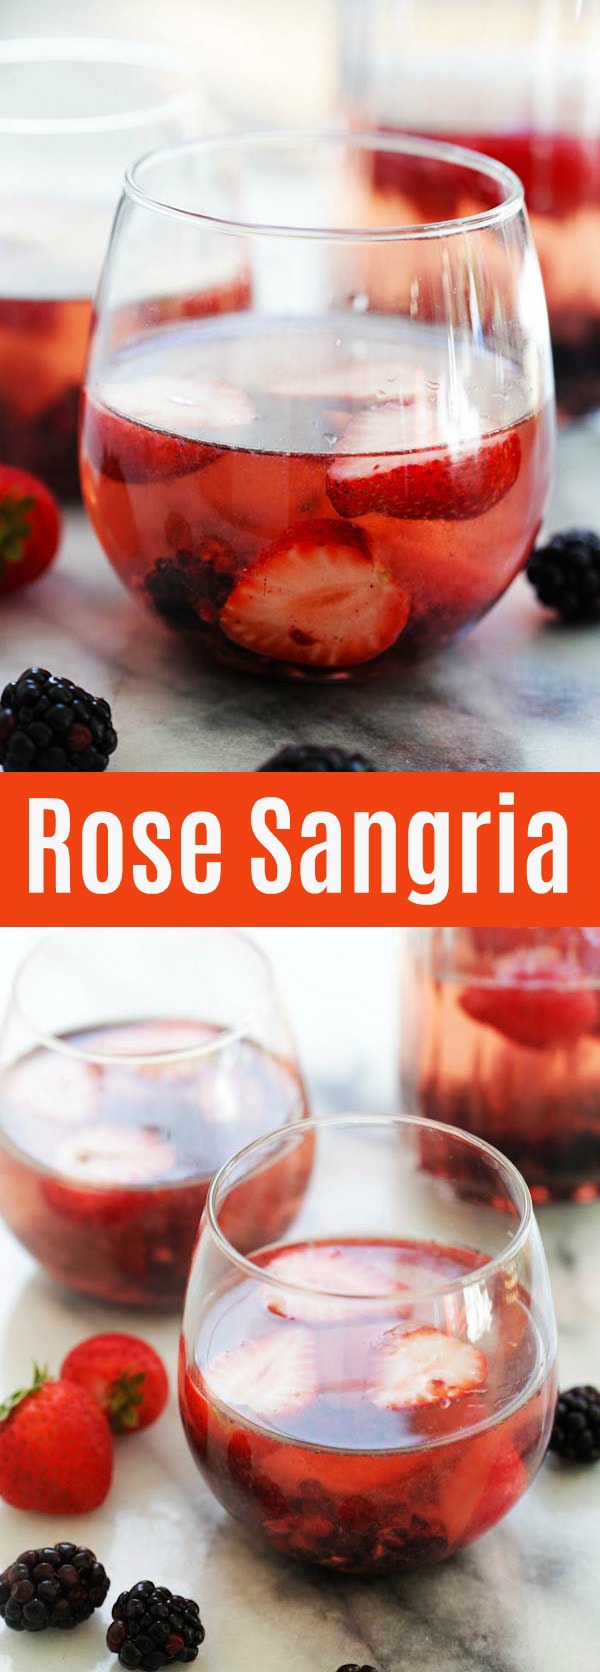 Rosé Sangria – the only summer drink you’ll need. This Rosé Sangria recipe is refreshing, bubbly and loaded with summer berries | rasamalaysia.com